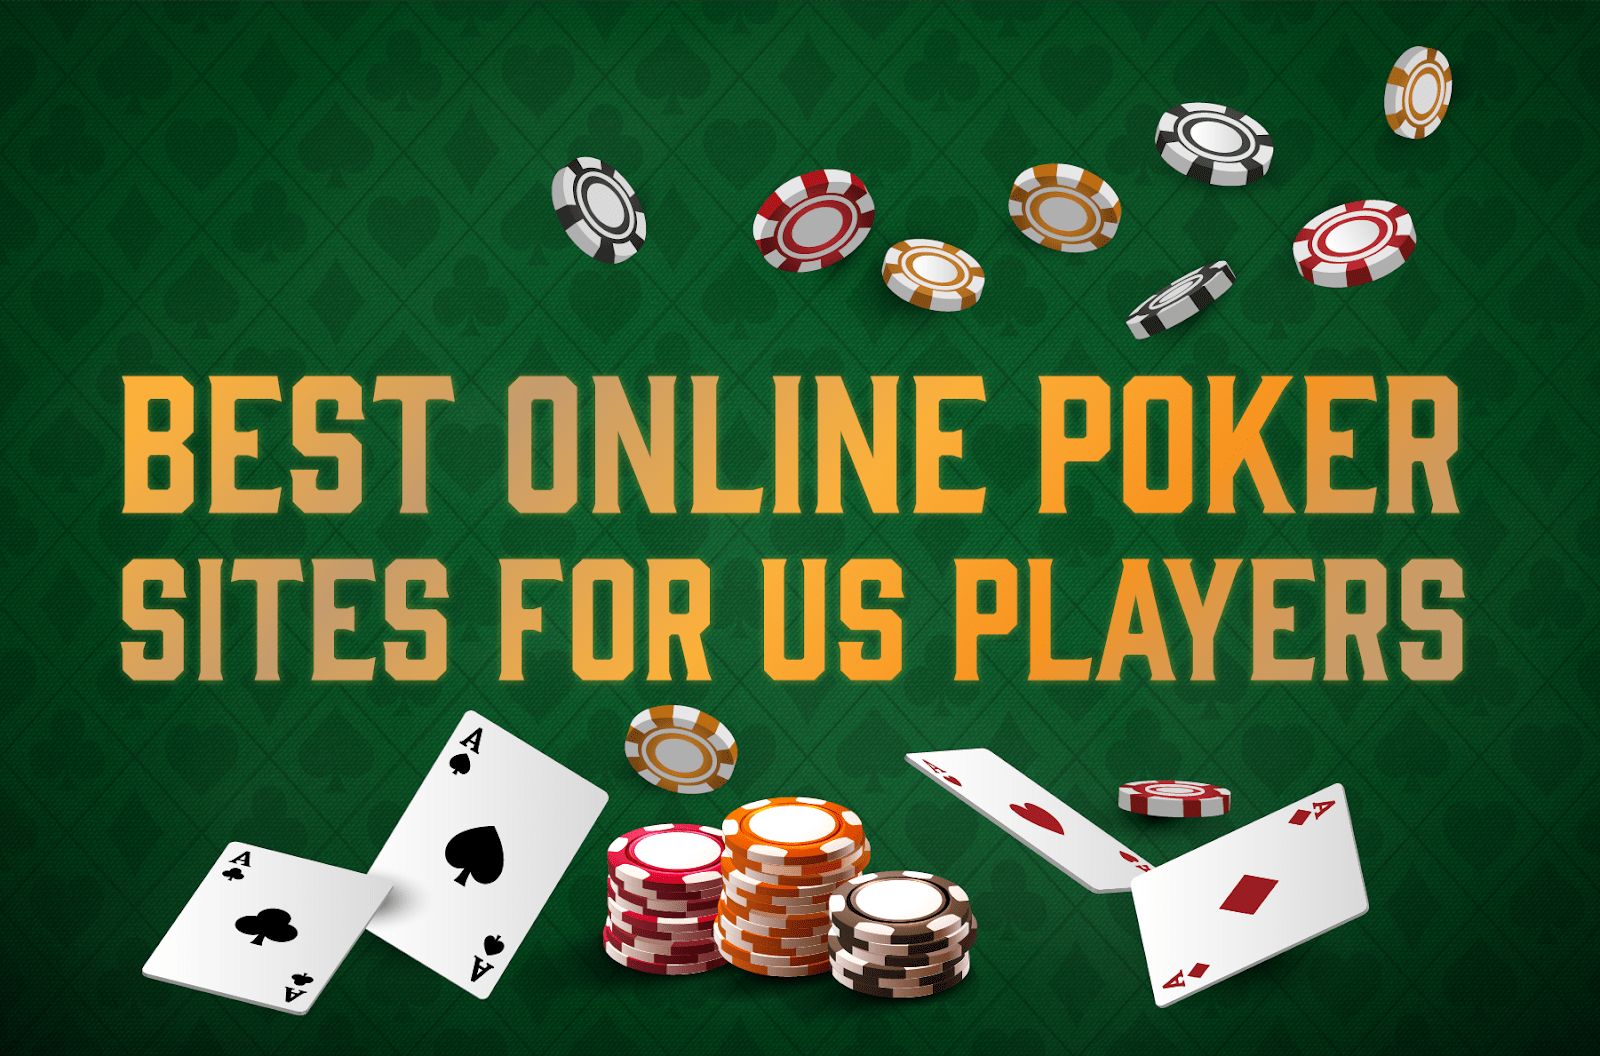 Get Ready To Play The Best Casino Games And Win Big At Bet365